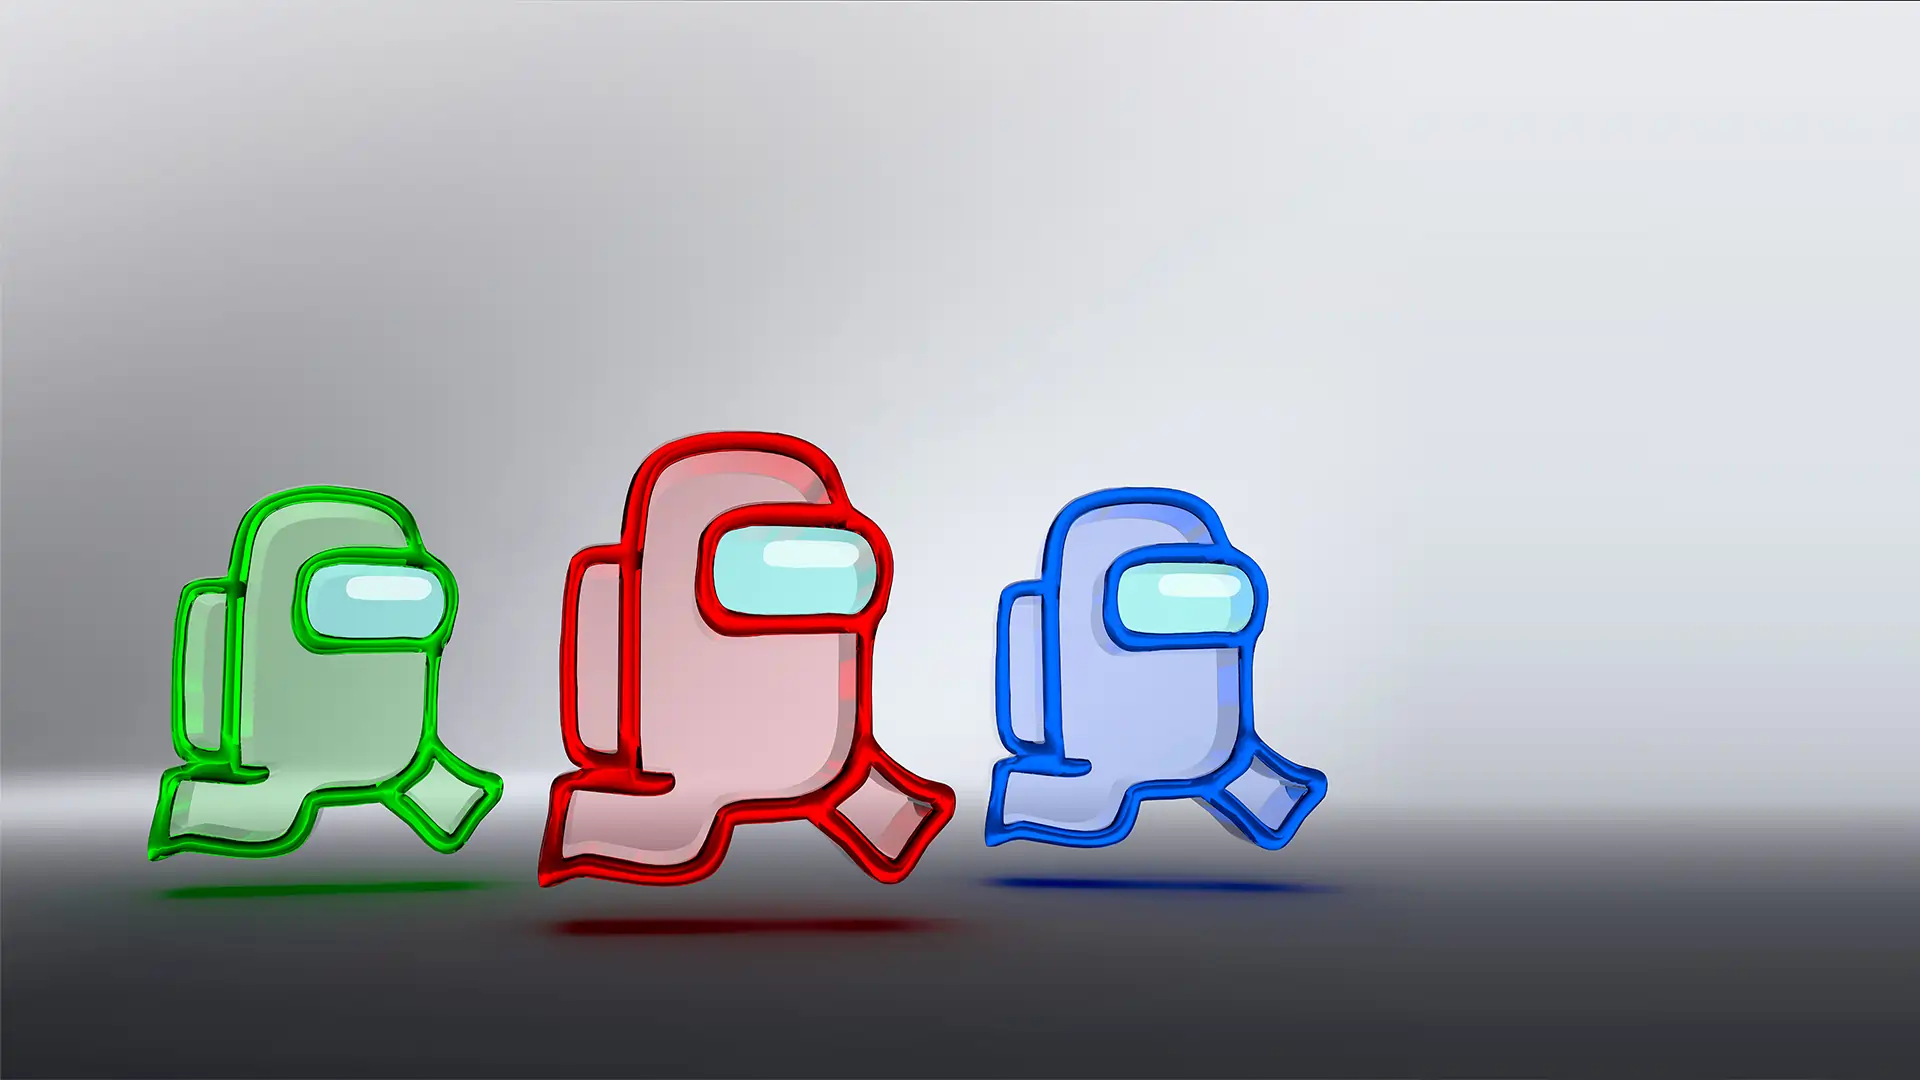 Among Us colorful 3d character design in glass and white background.